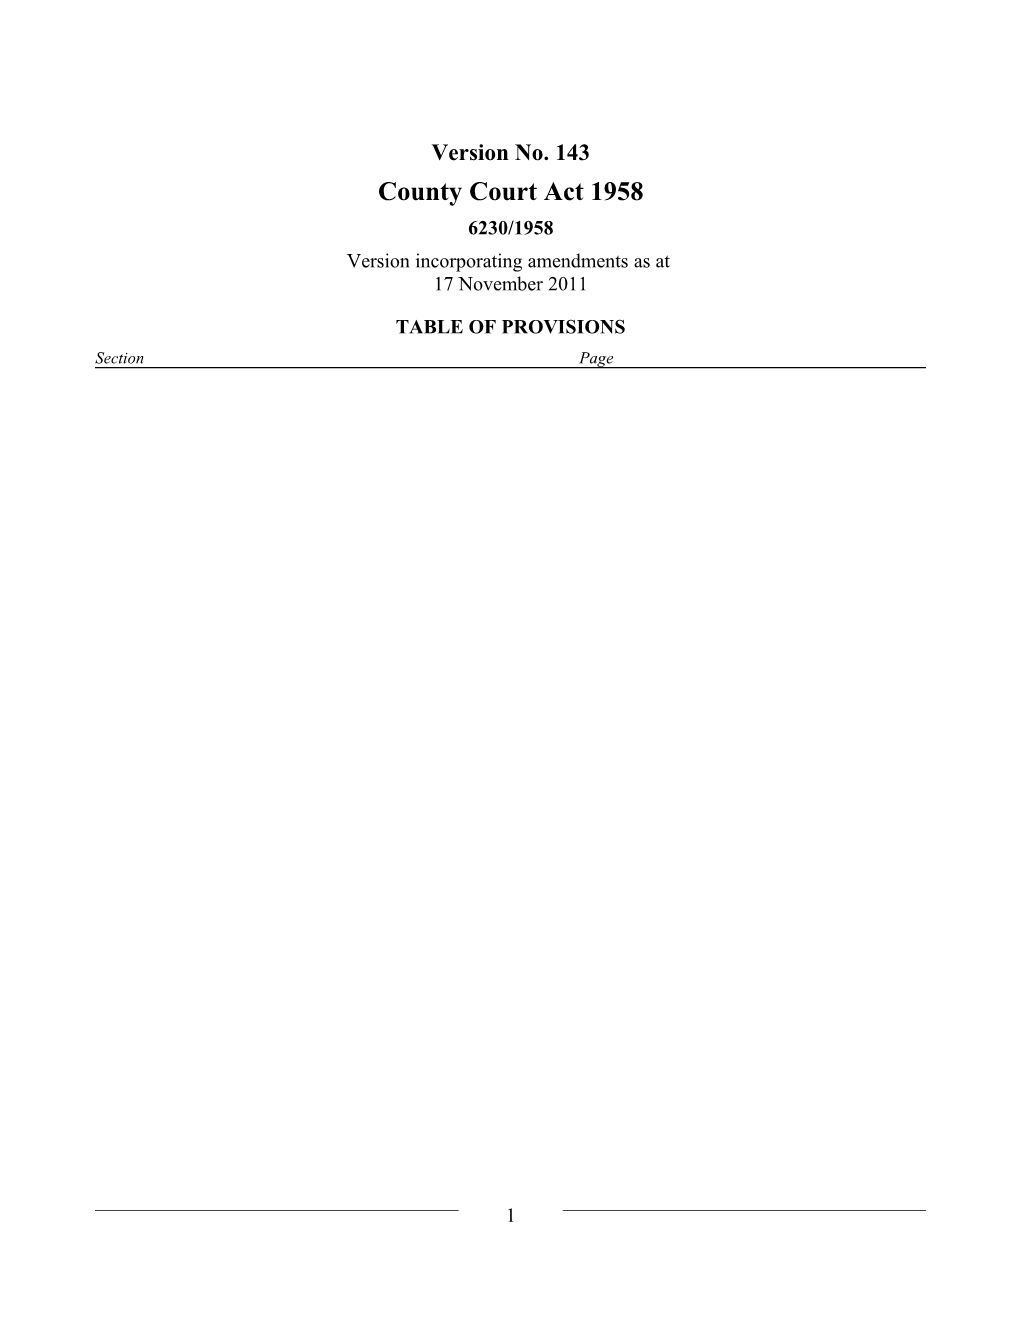 County Court Act 1958